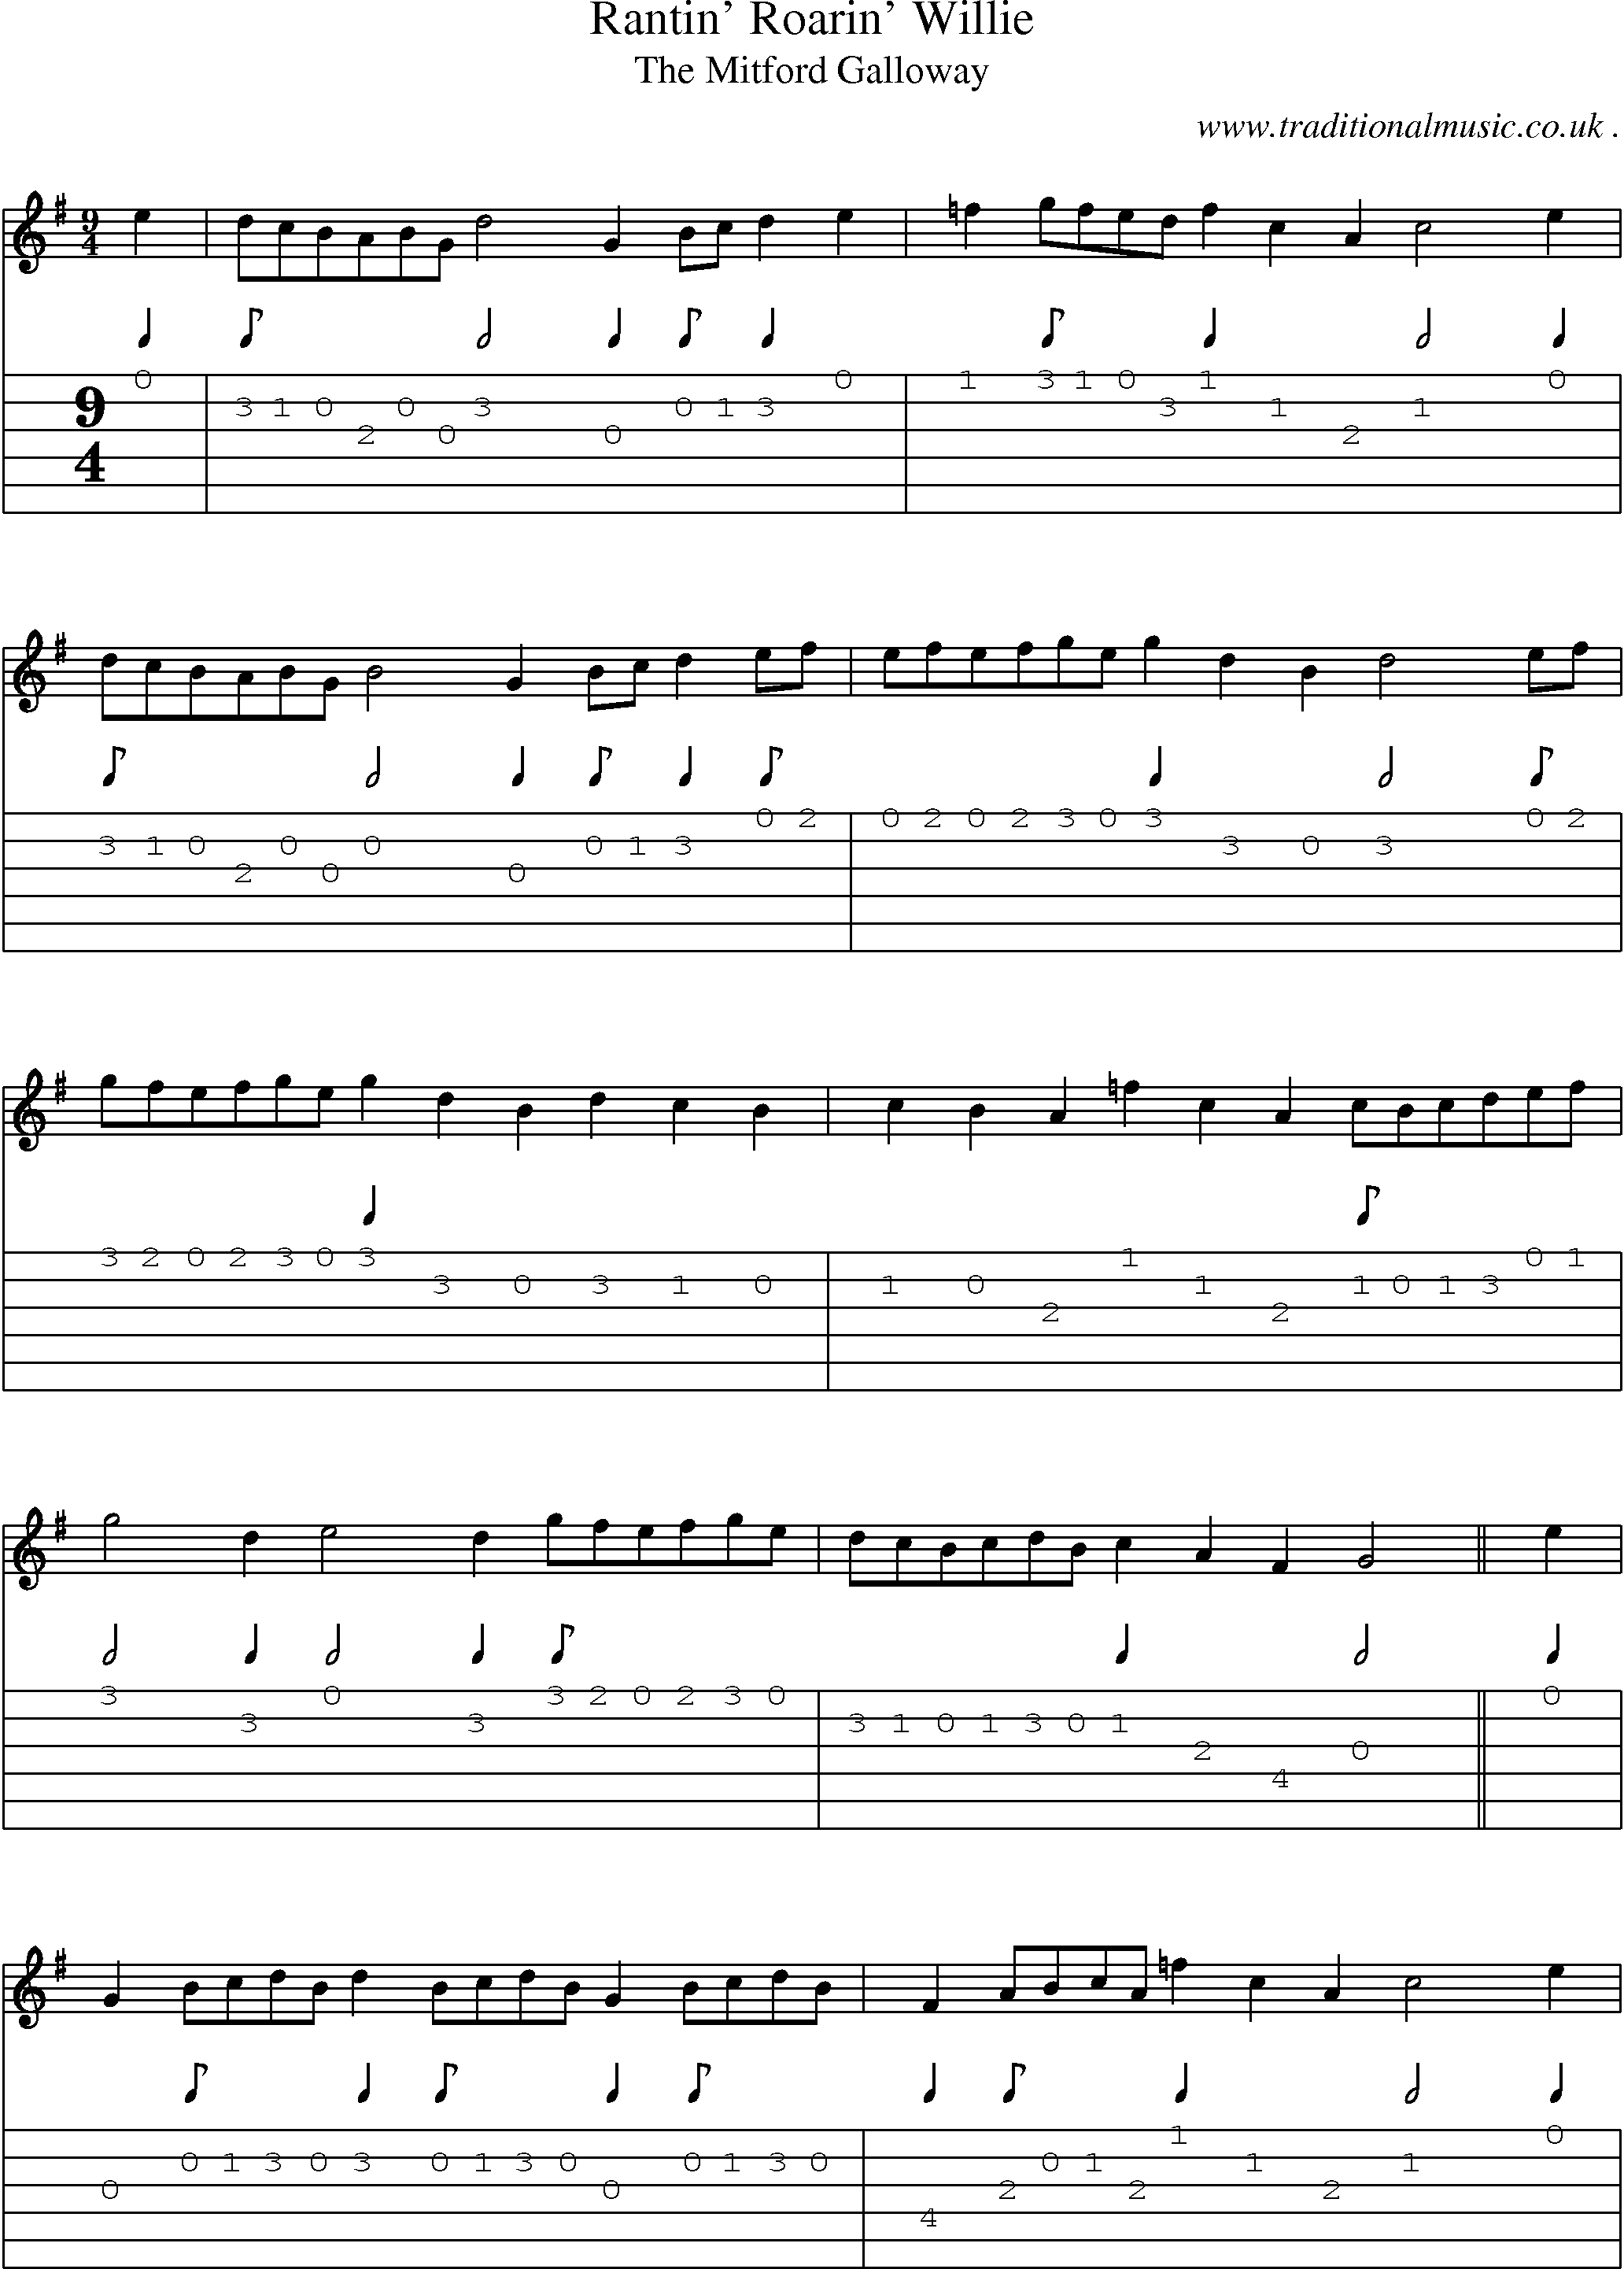 Sheet-Music and Guitar Tabs for Rantin Roarin Willie